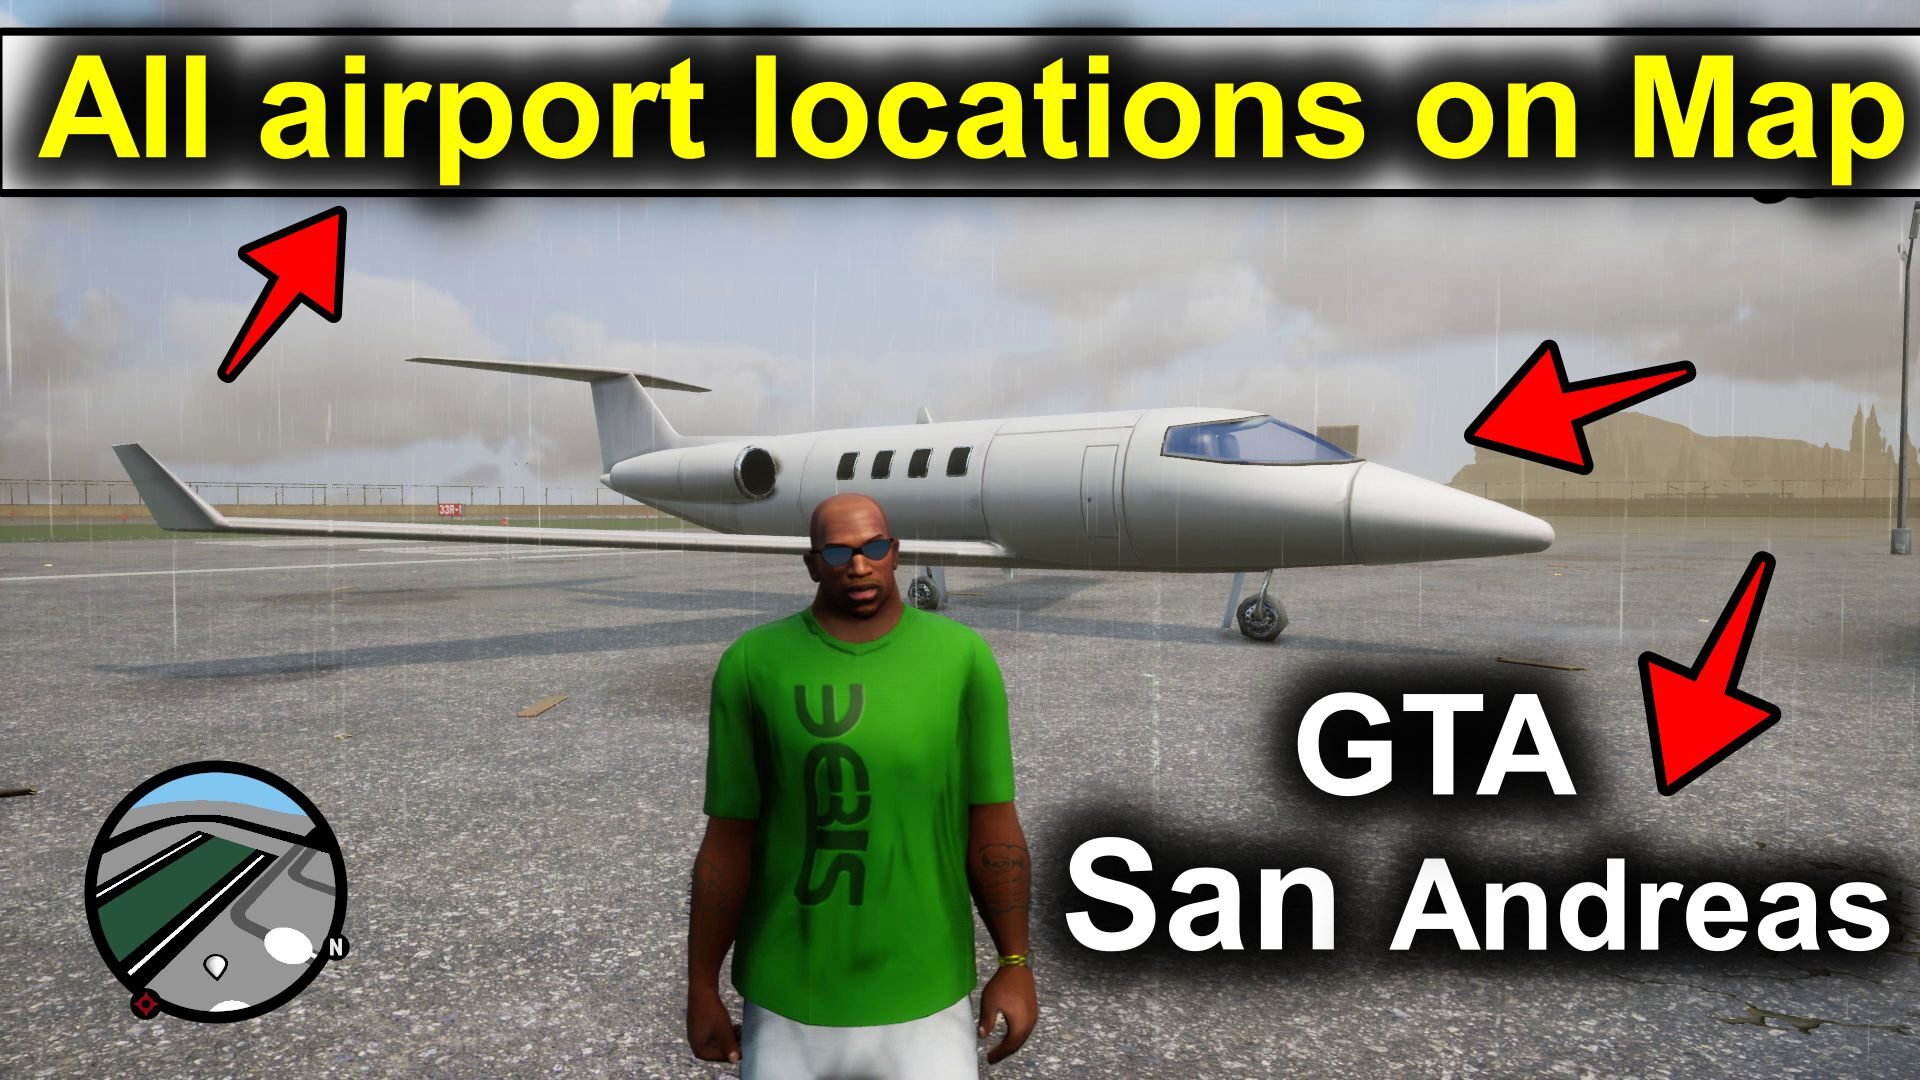 GTA San Andreas all airport locations on Map